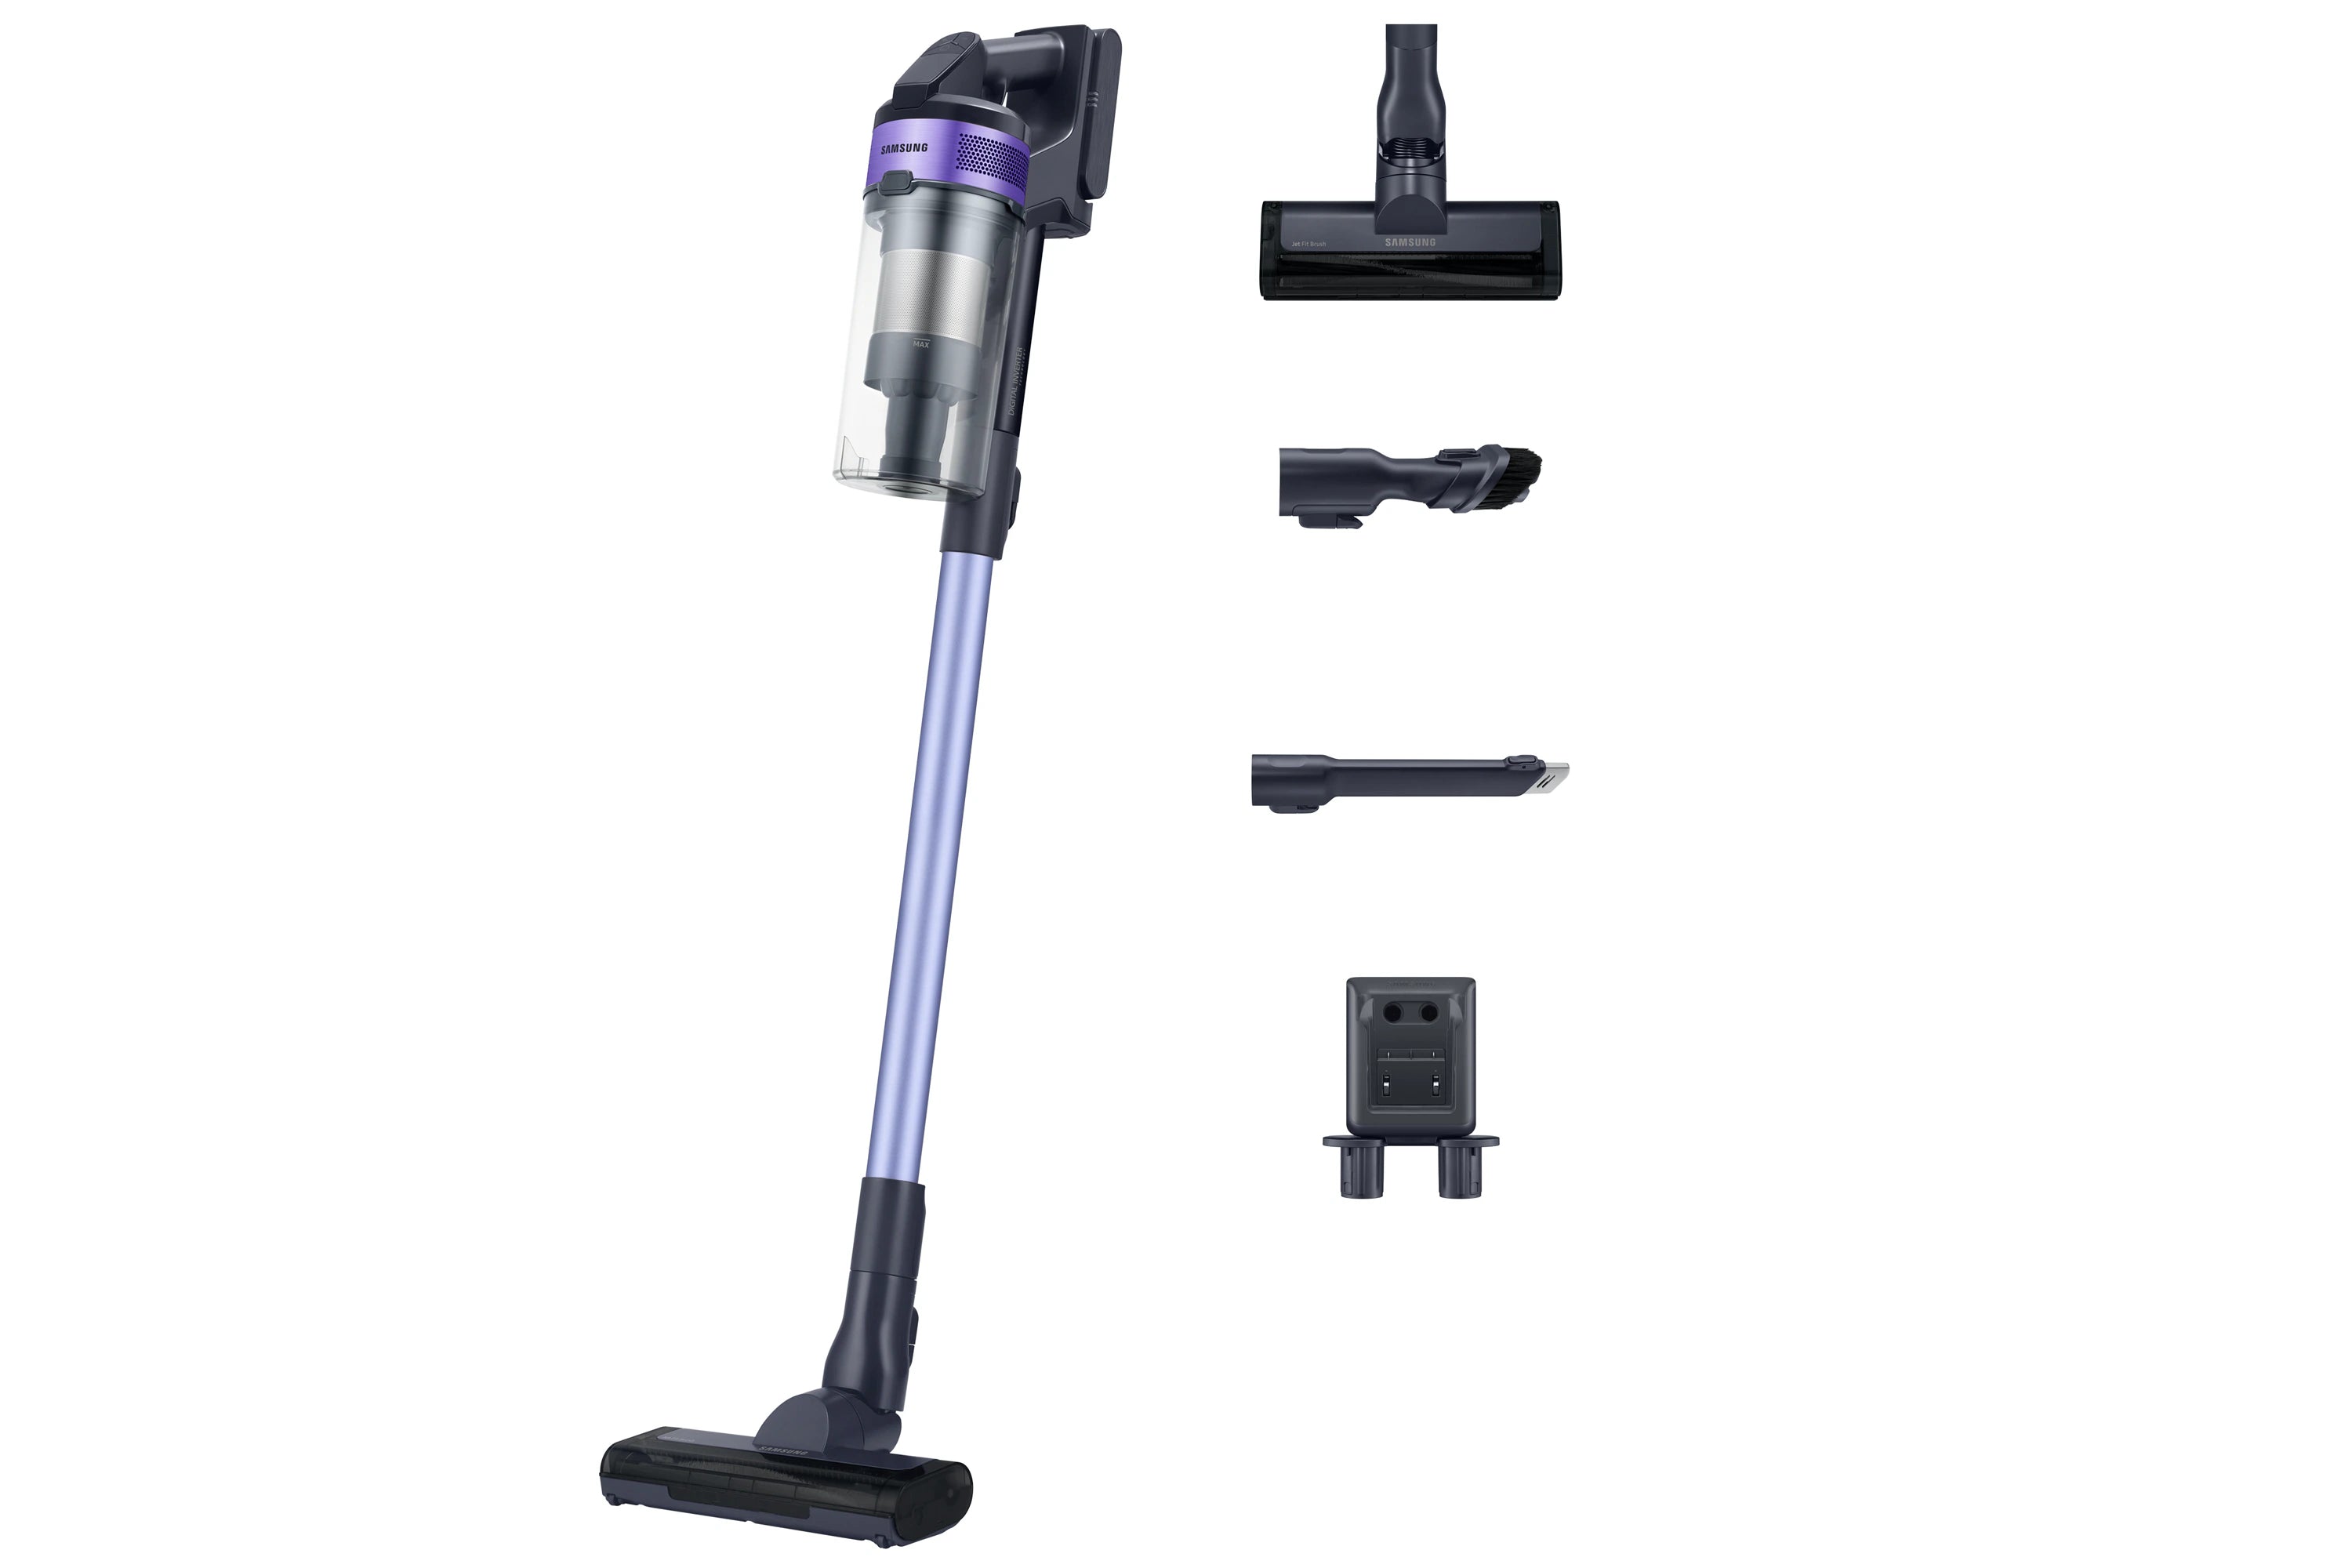 Image of Samsung Jet™ 60 Turbo Cordless Stick Vacuum Cleaner Max 150W Suction Power VS15A6031R4/EU